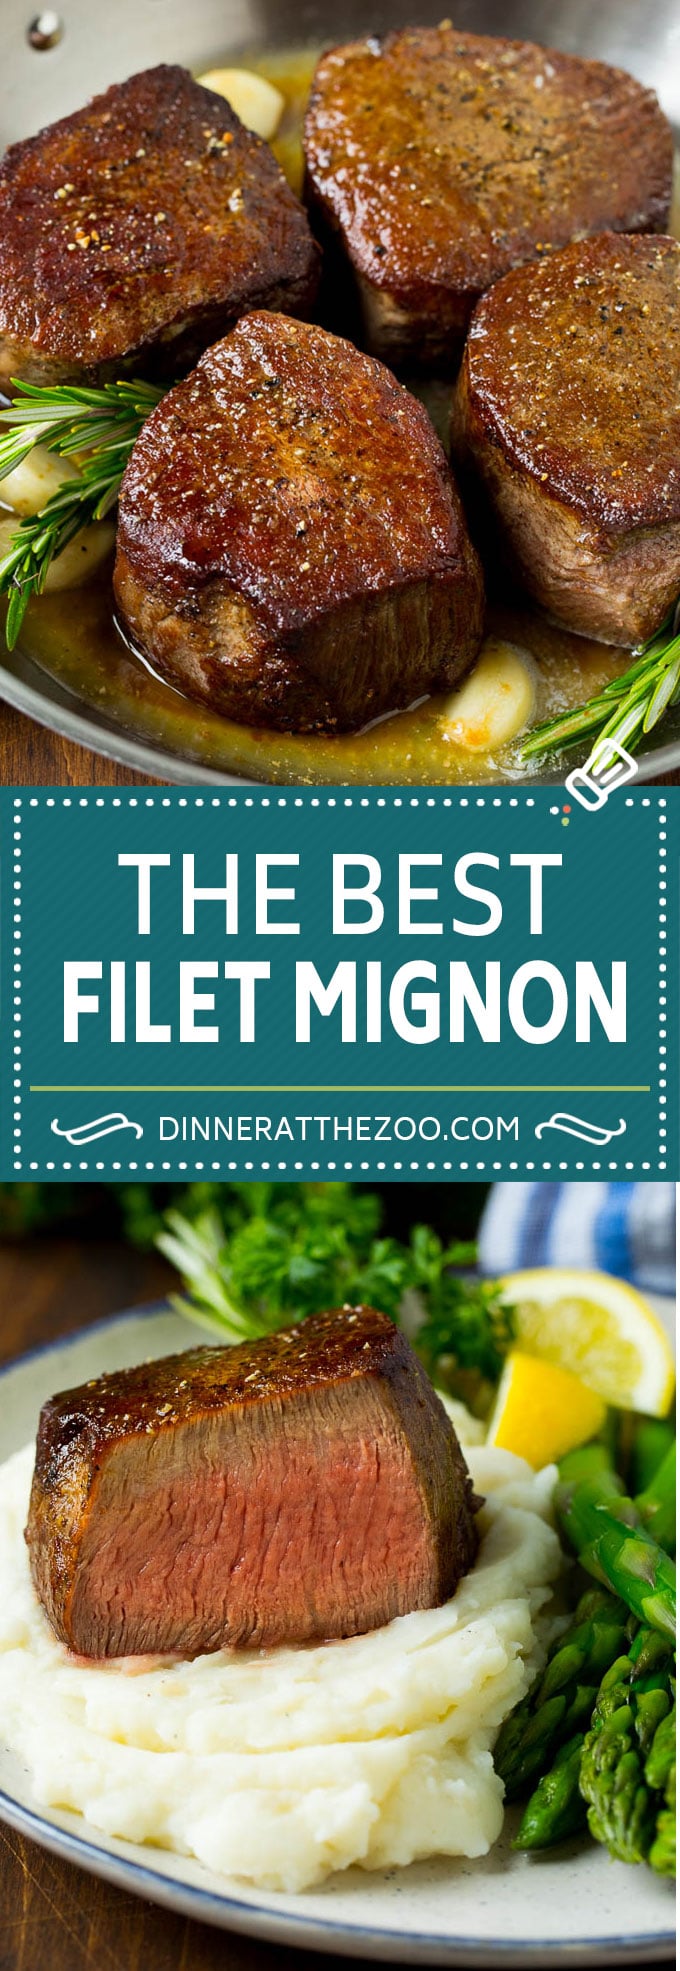 This filet mignon recipe is tender steak seared to golden brown perfection, then topped with garlic and herb butter.